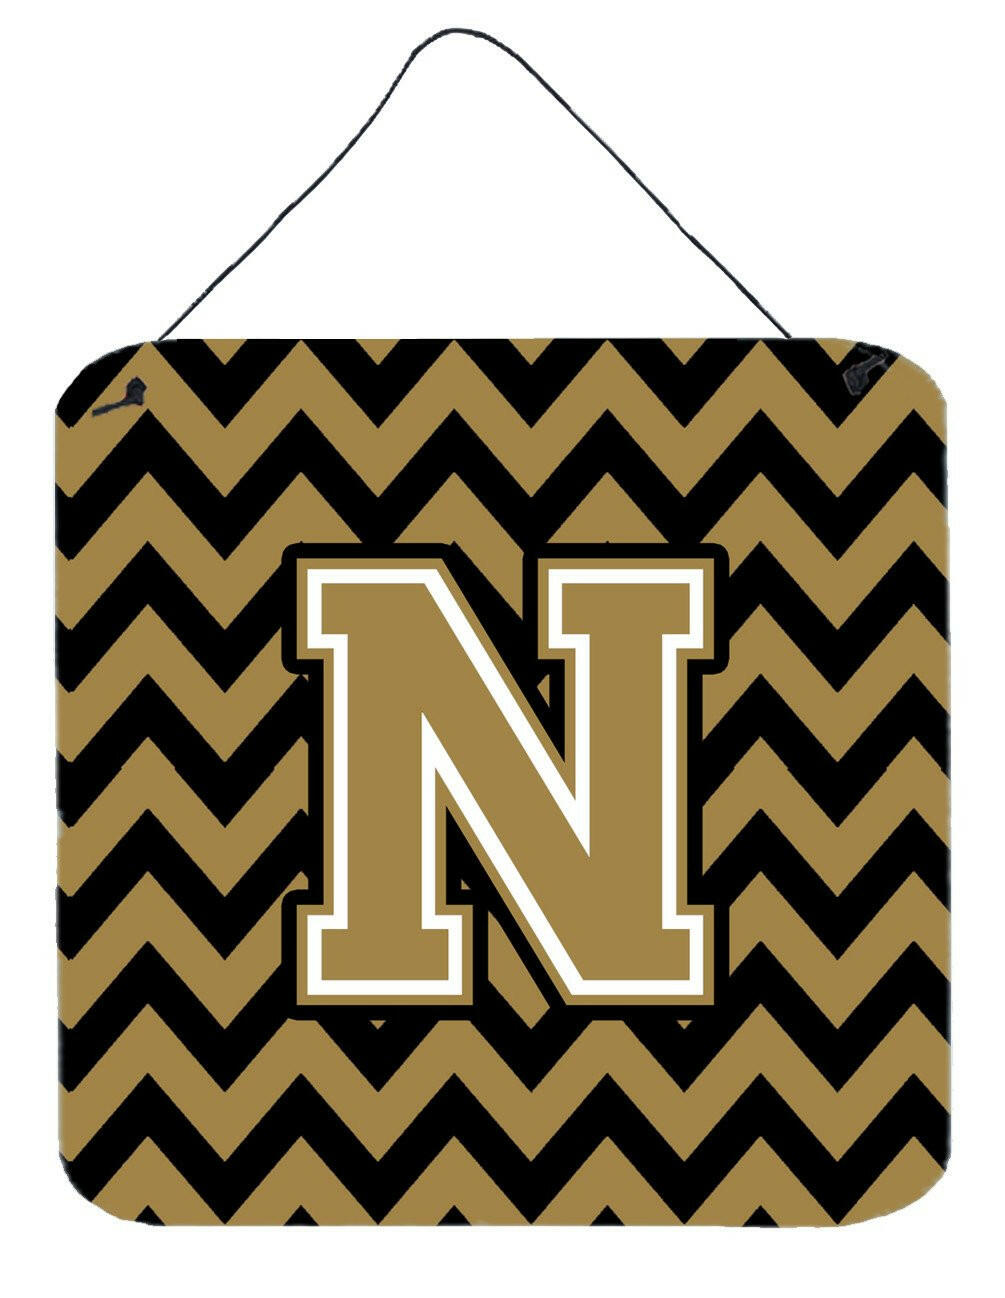 Letter N Chevron Black and Gold  Wall or Door Hanging Prints CJ1050-NDS66 by Caroline's Treasures